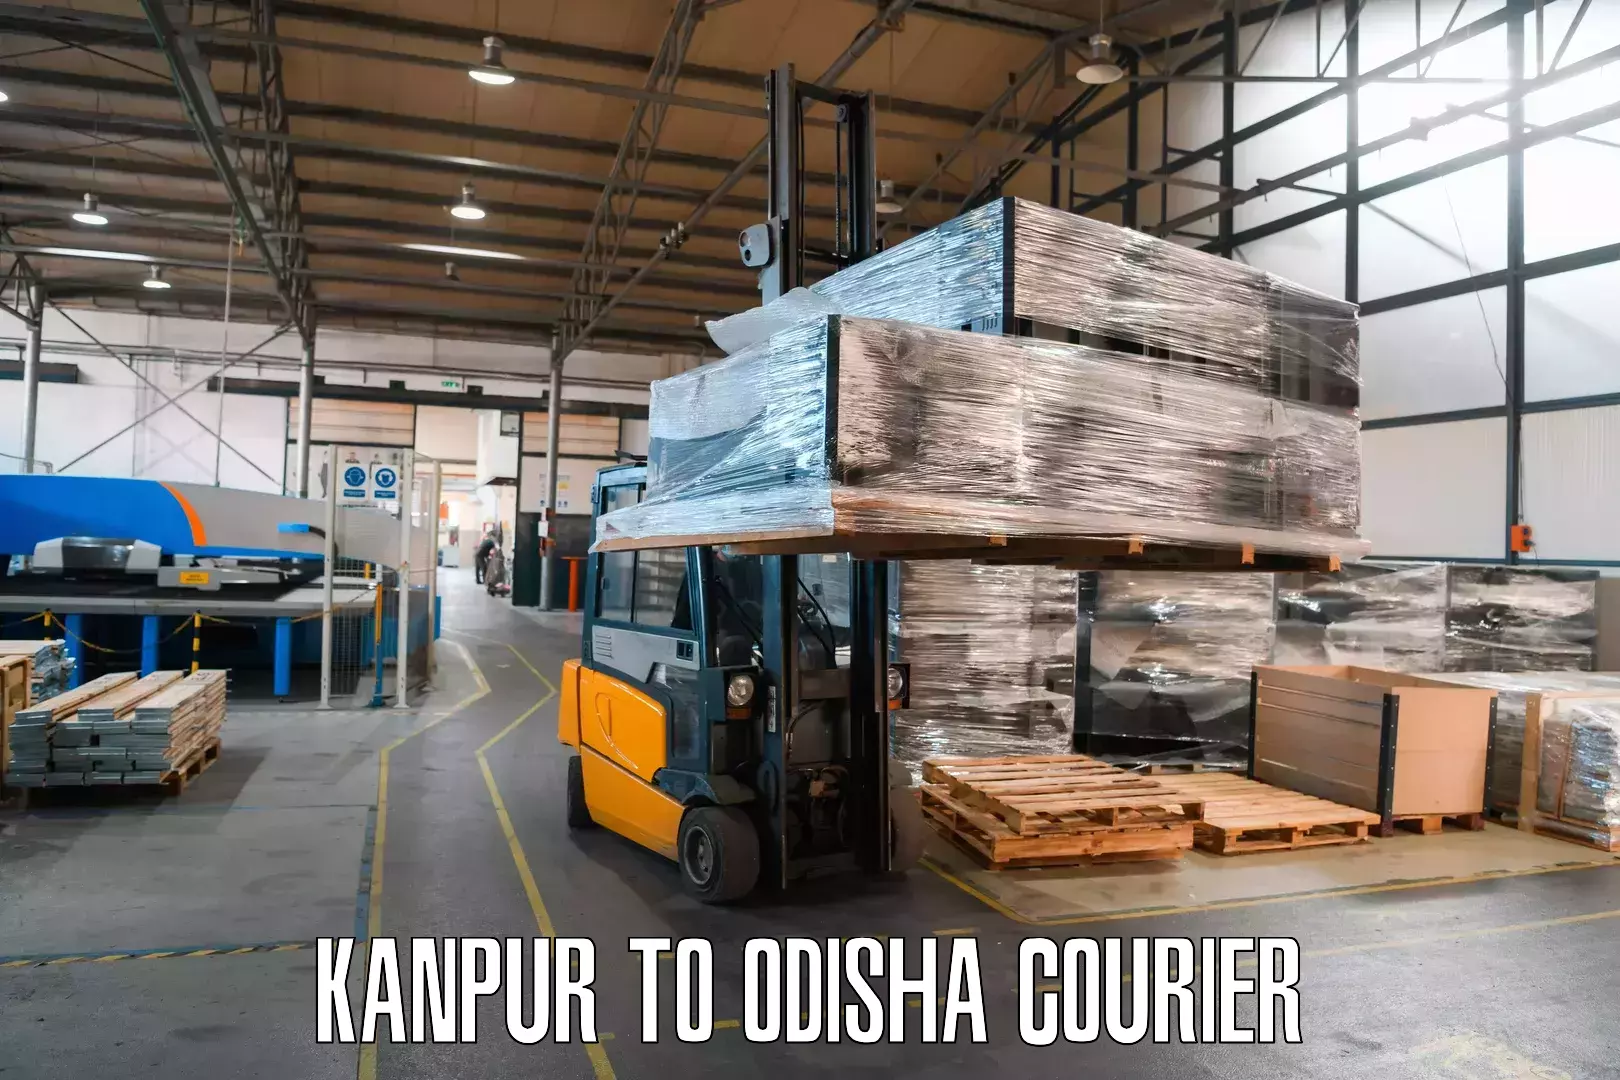 Flexible delivery schedules Kanpur to Kendujhar